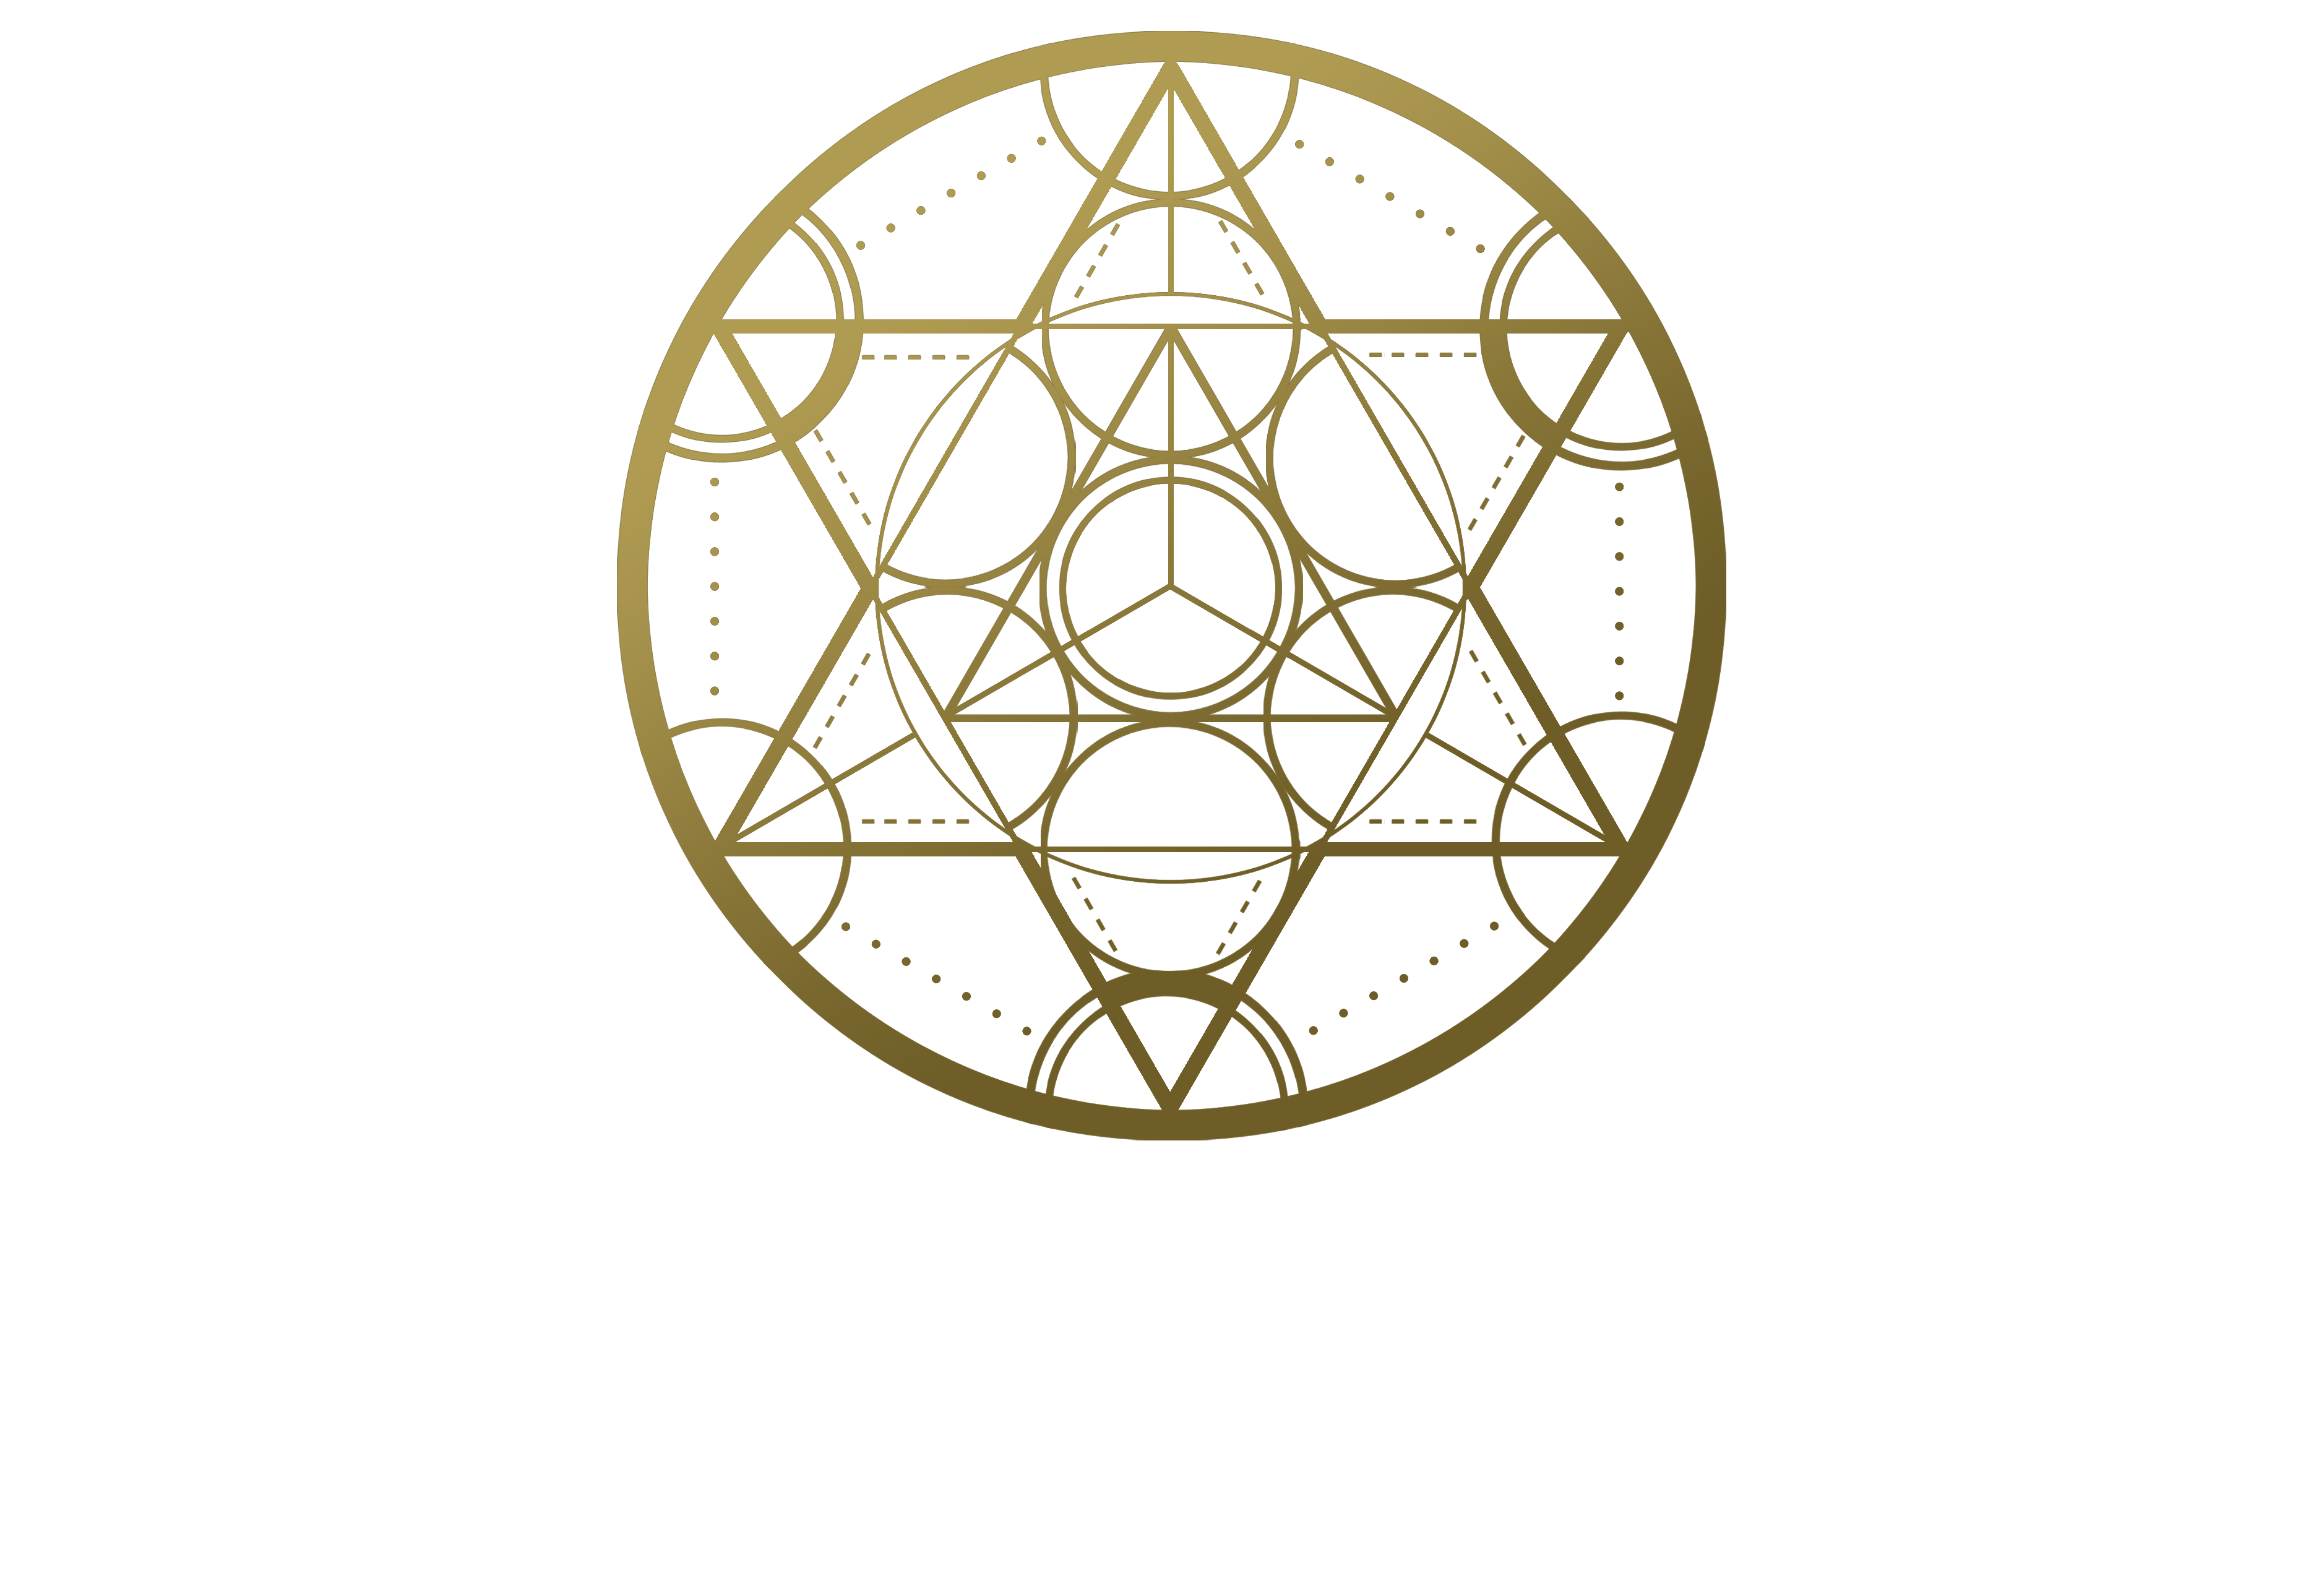 Soulcybin for anxiety